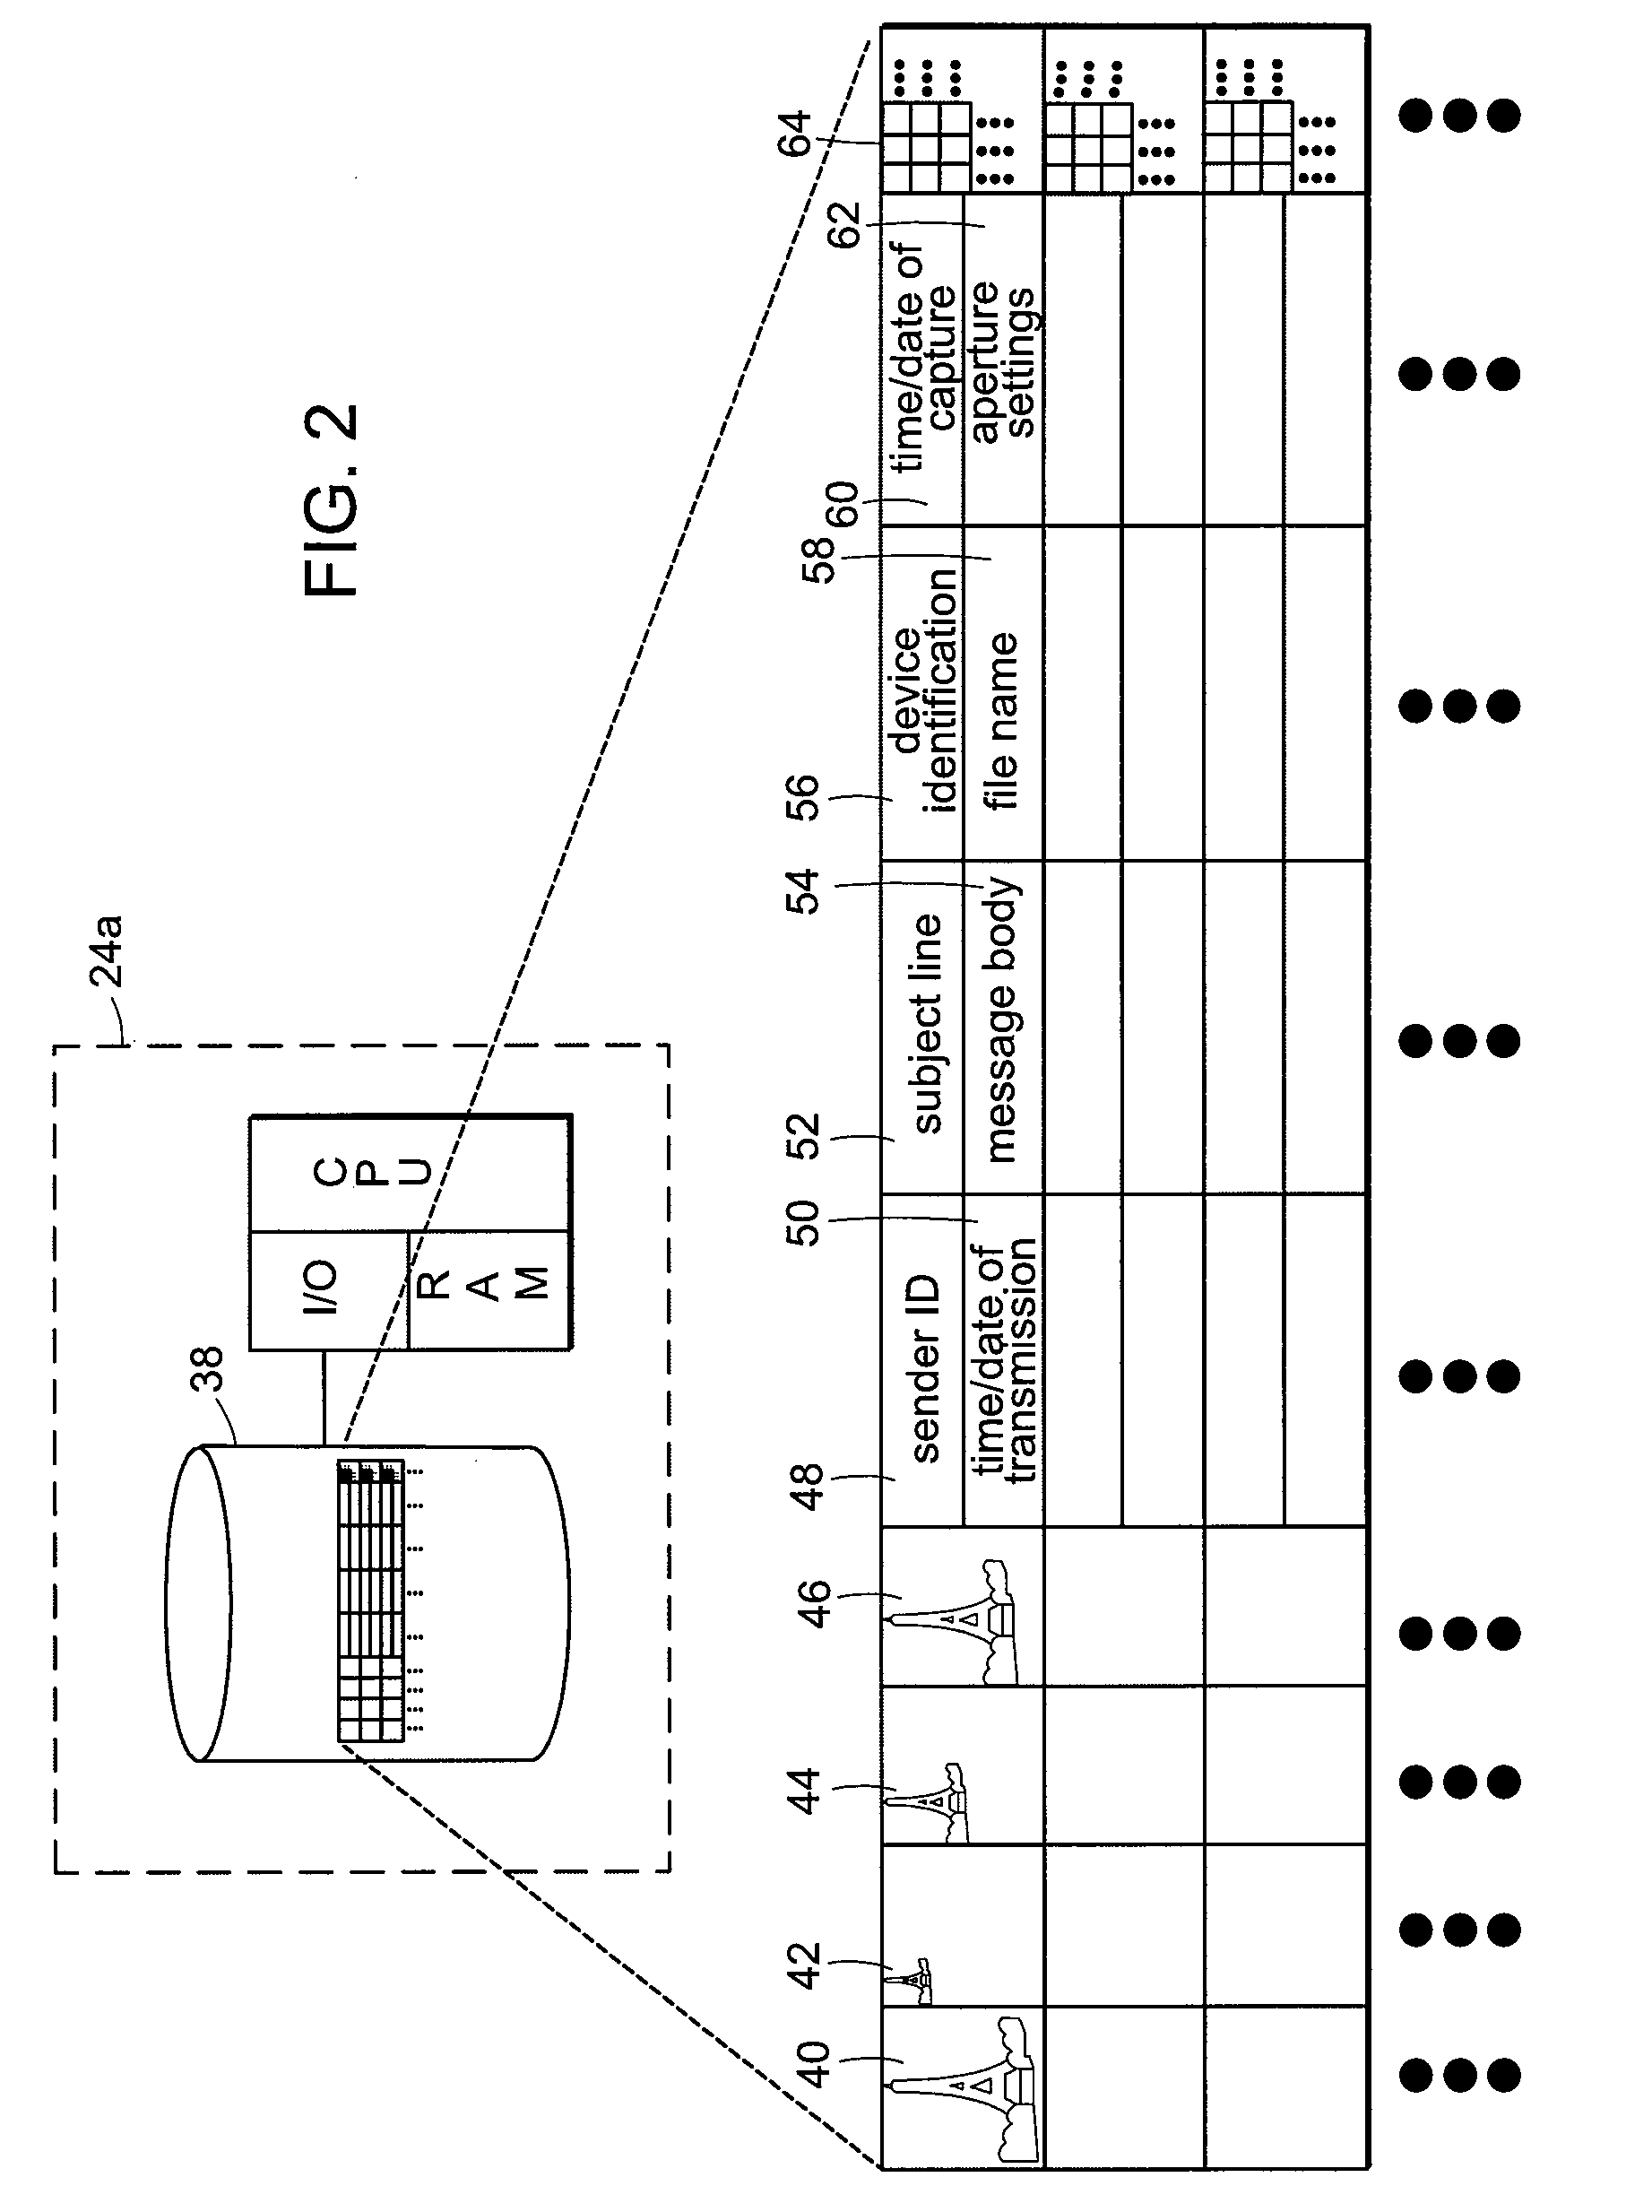 Systems and methods for multimedia content sharing